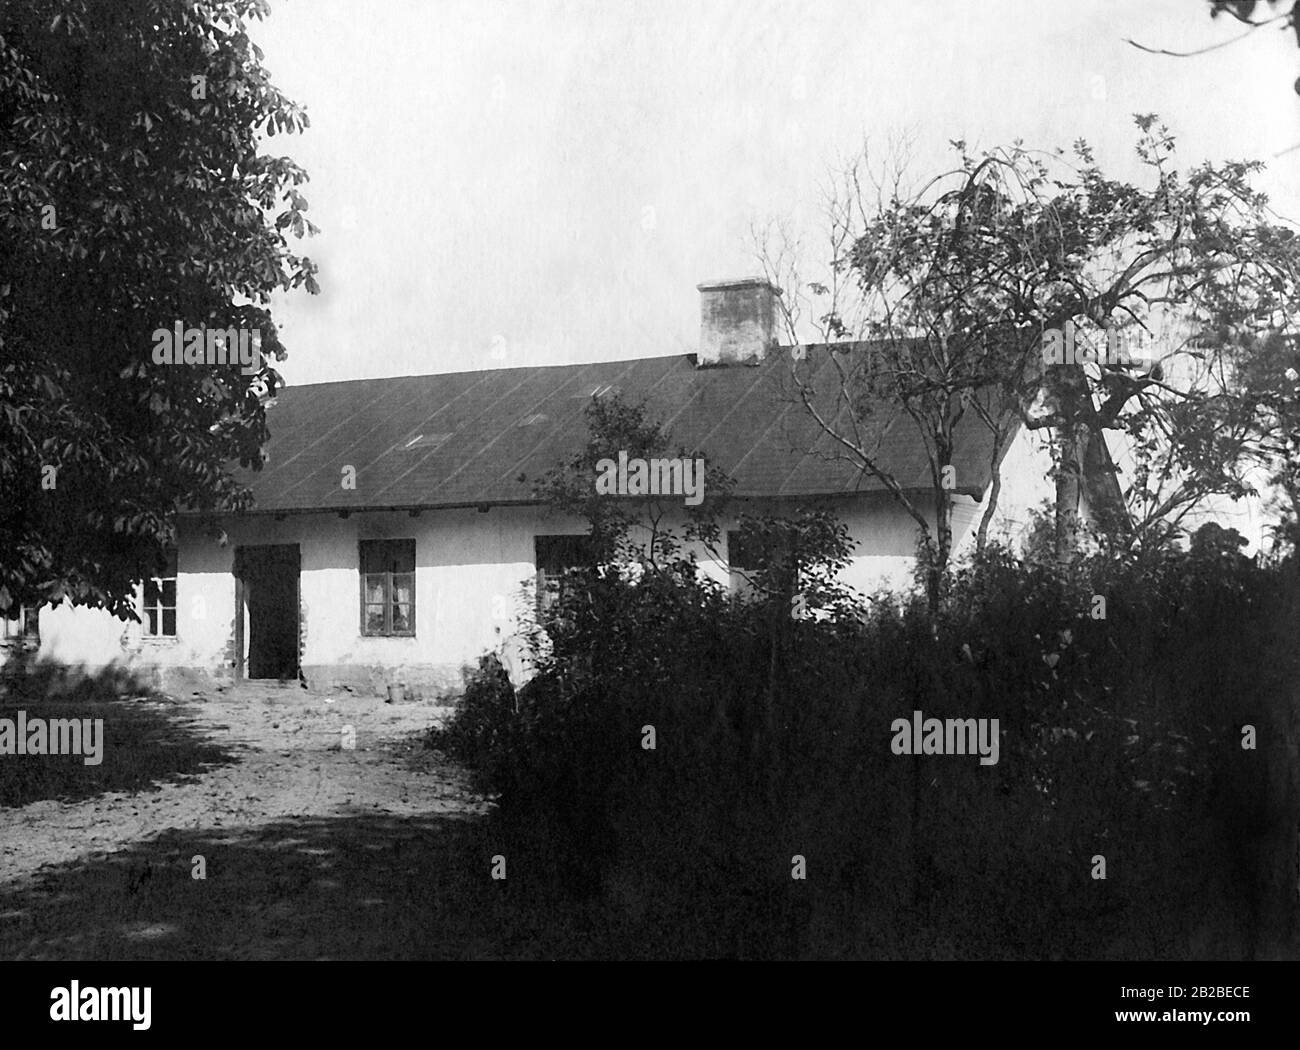 The birthplace of famous Polish composer Frederic Chopin. The picture was taken in 1918 in Zelazowa-Wola (near Warsaw) where Chopin was born on 1 March 1810. Frédéric Chopin, composer, Poland Stock Photo